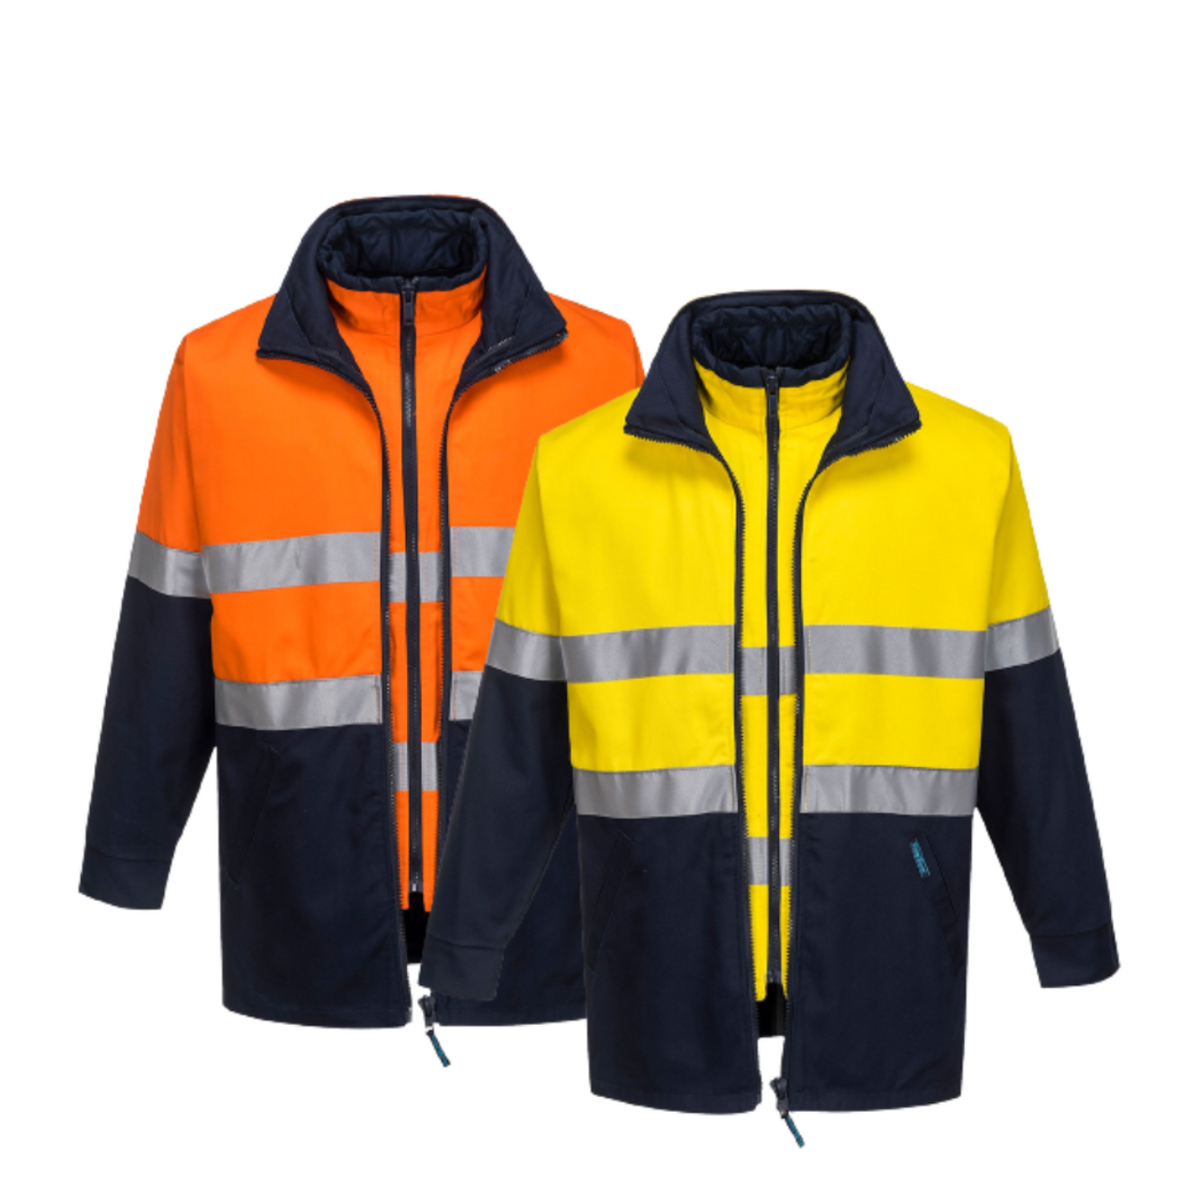 Portwest Hume 100% Cotton 4-in-1 Jacket 2 Tone Reflective Work Safety MJ777-Collins Clothing Co